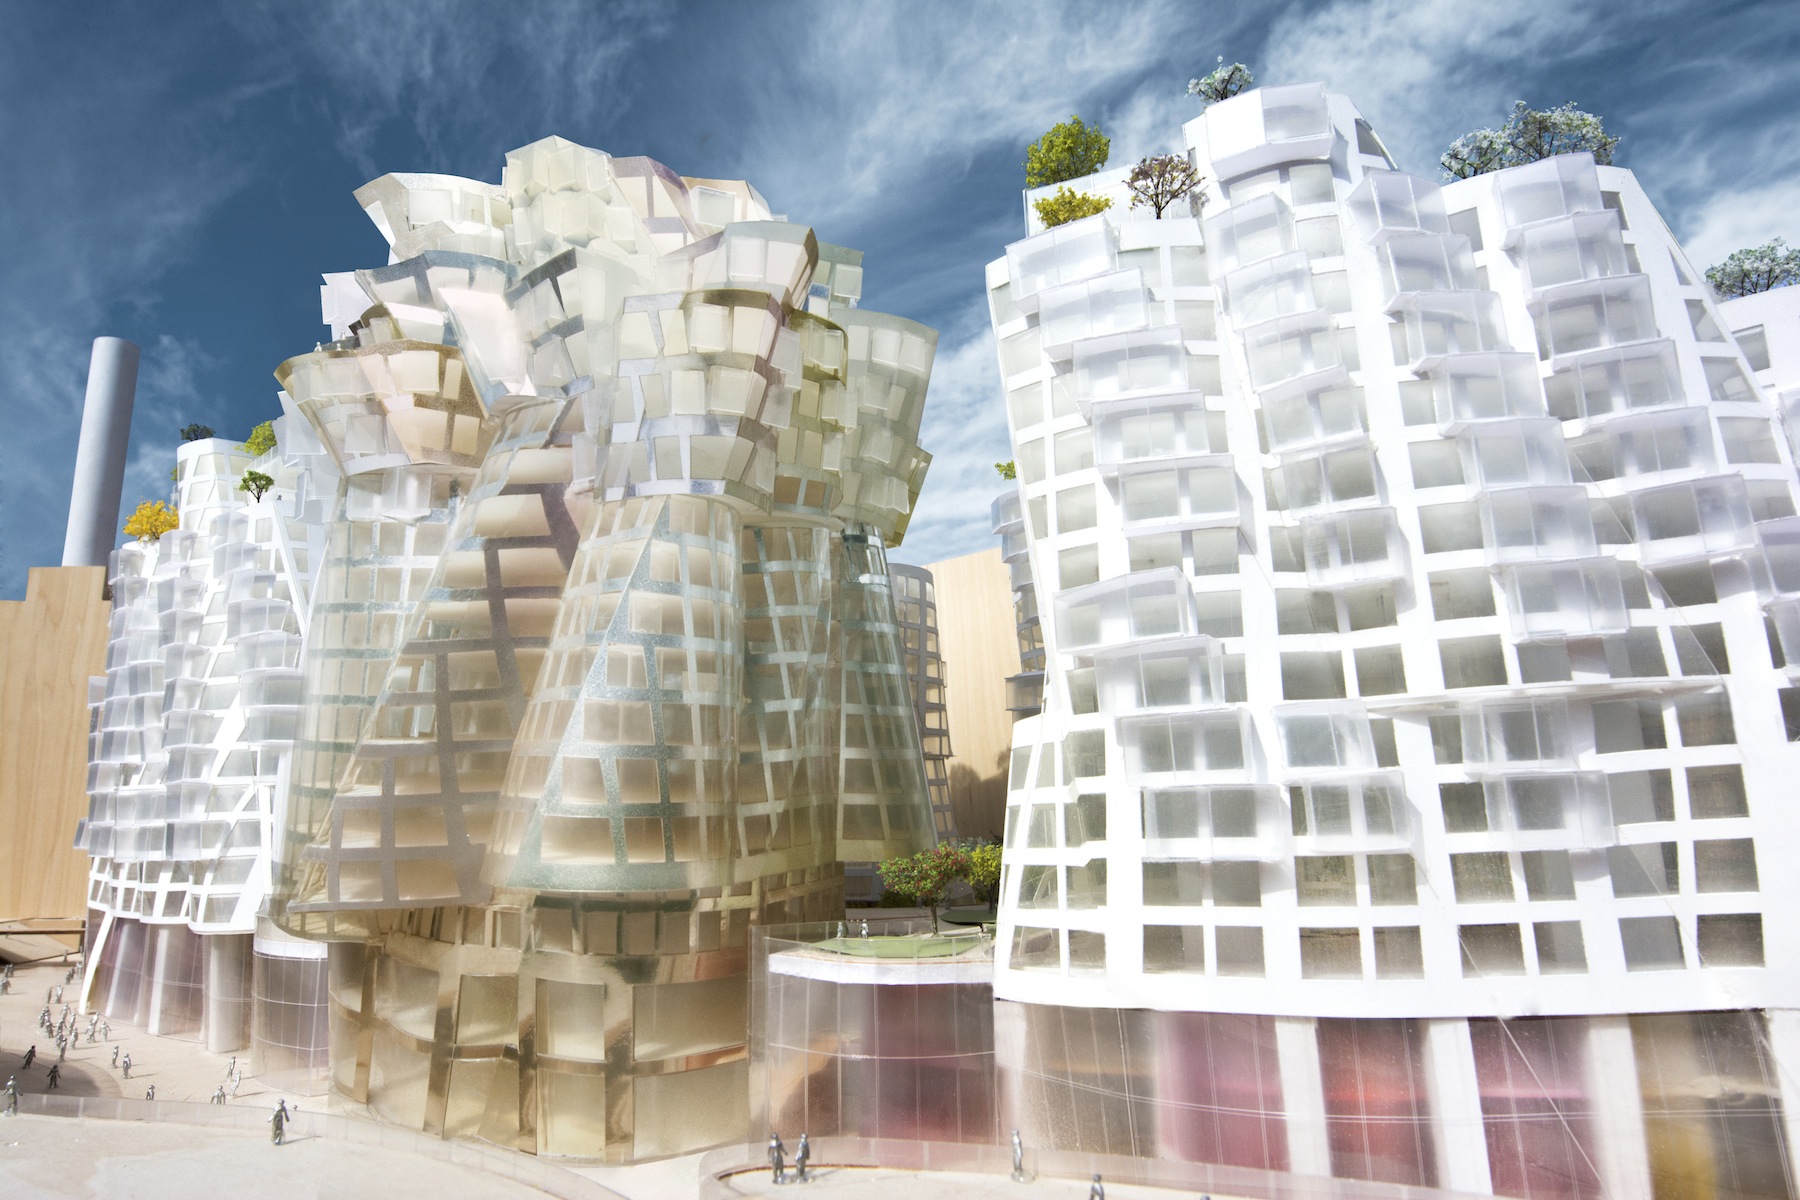 Phase Three of the Battersea Power Station Development is designed by Gehry Part